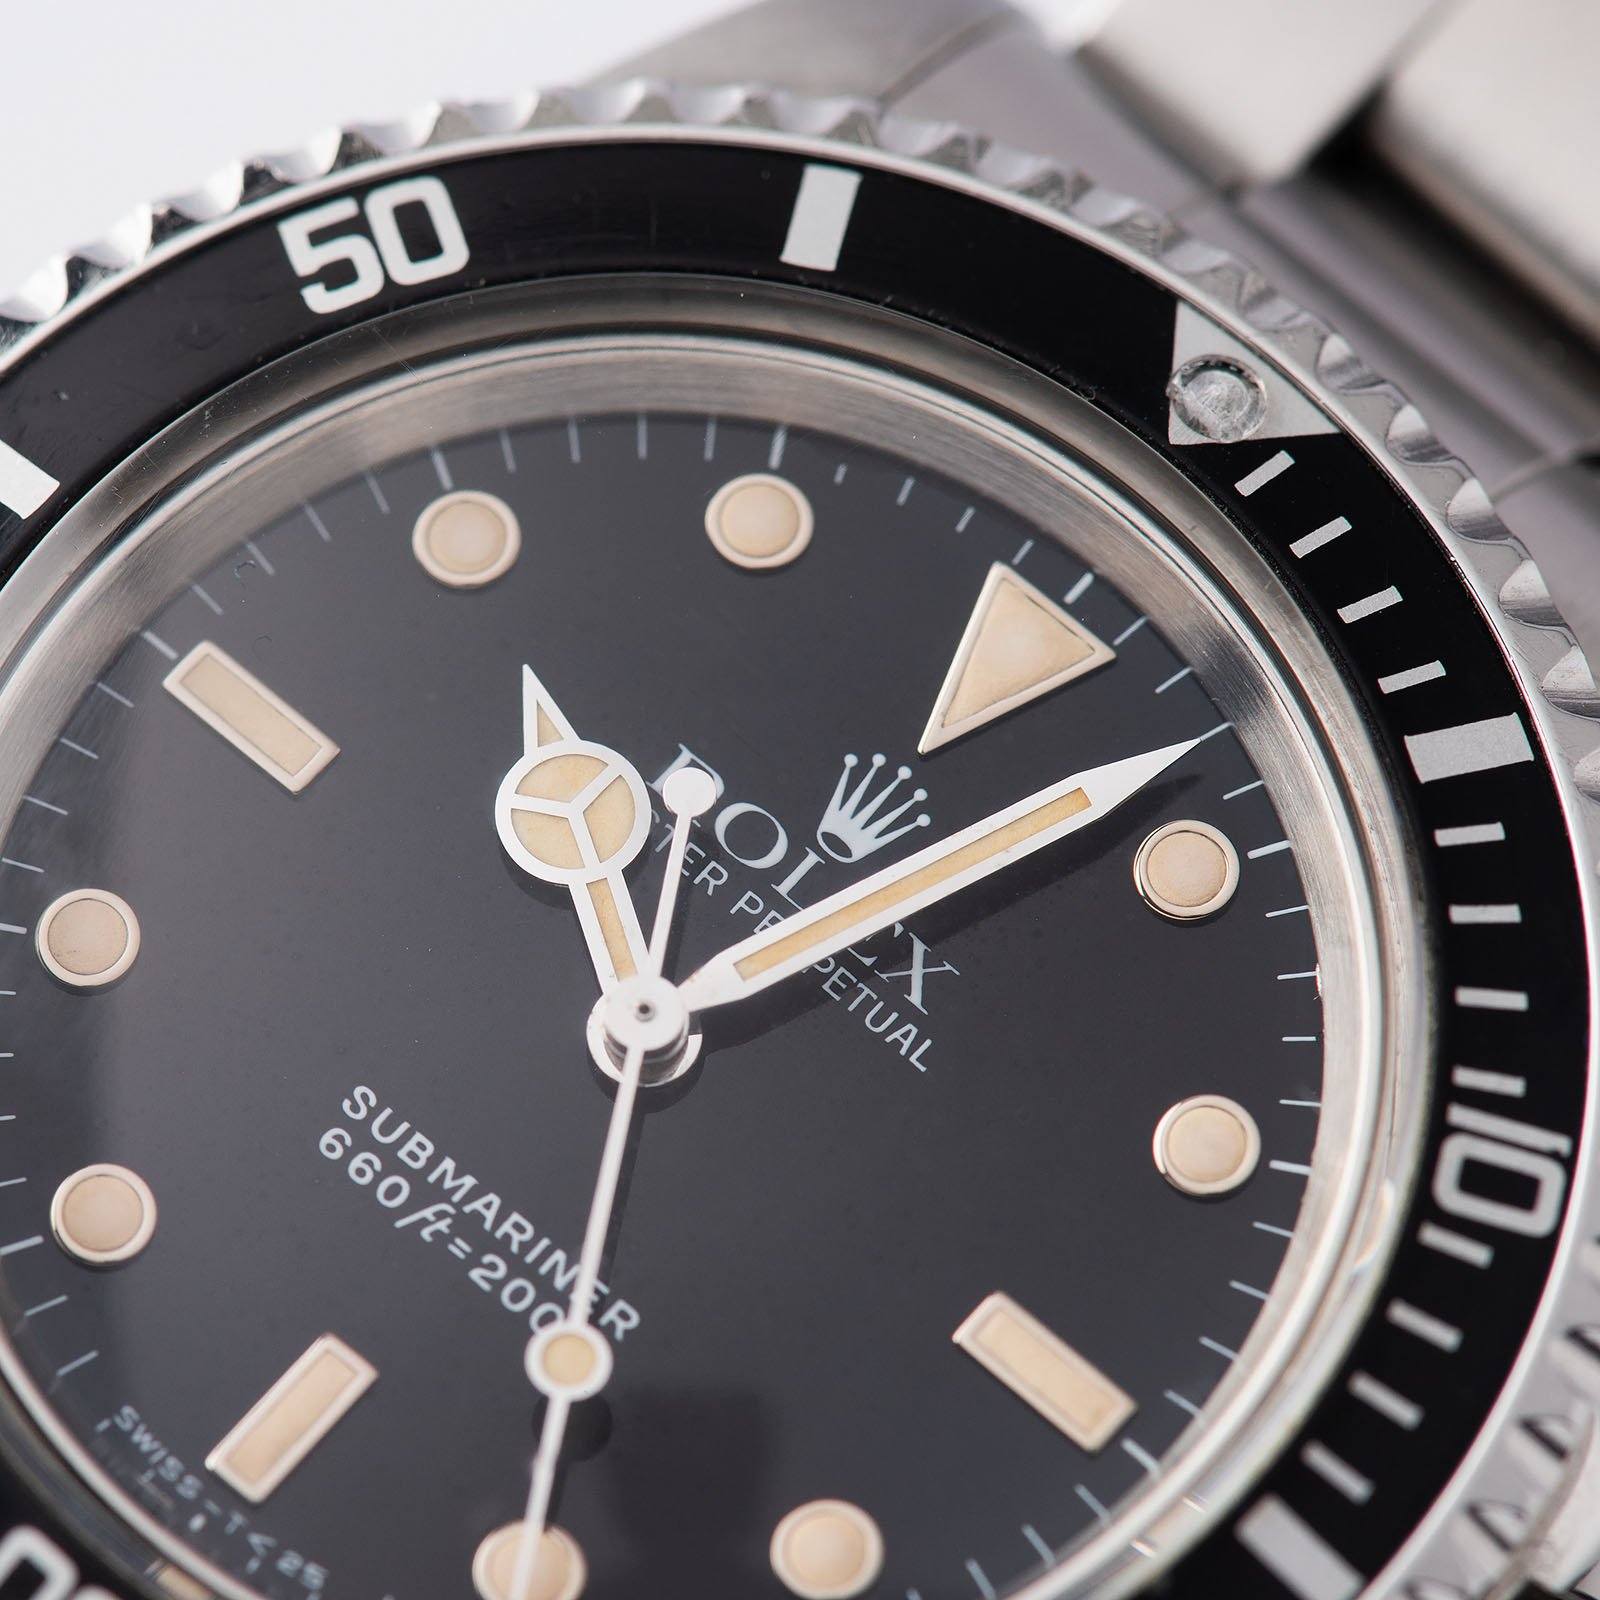 Rolex Submariner 5513 with White Gold Hour Markers